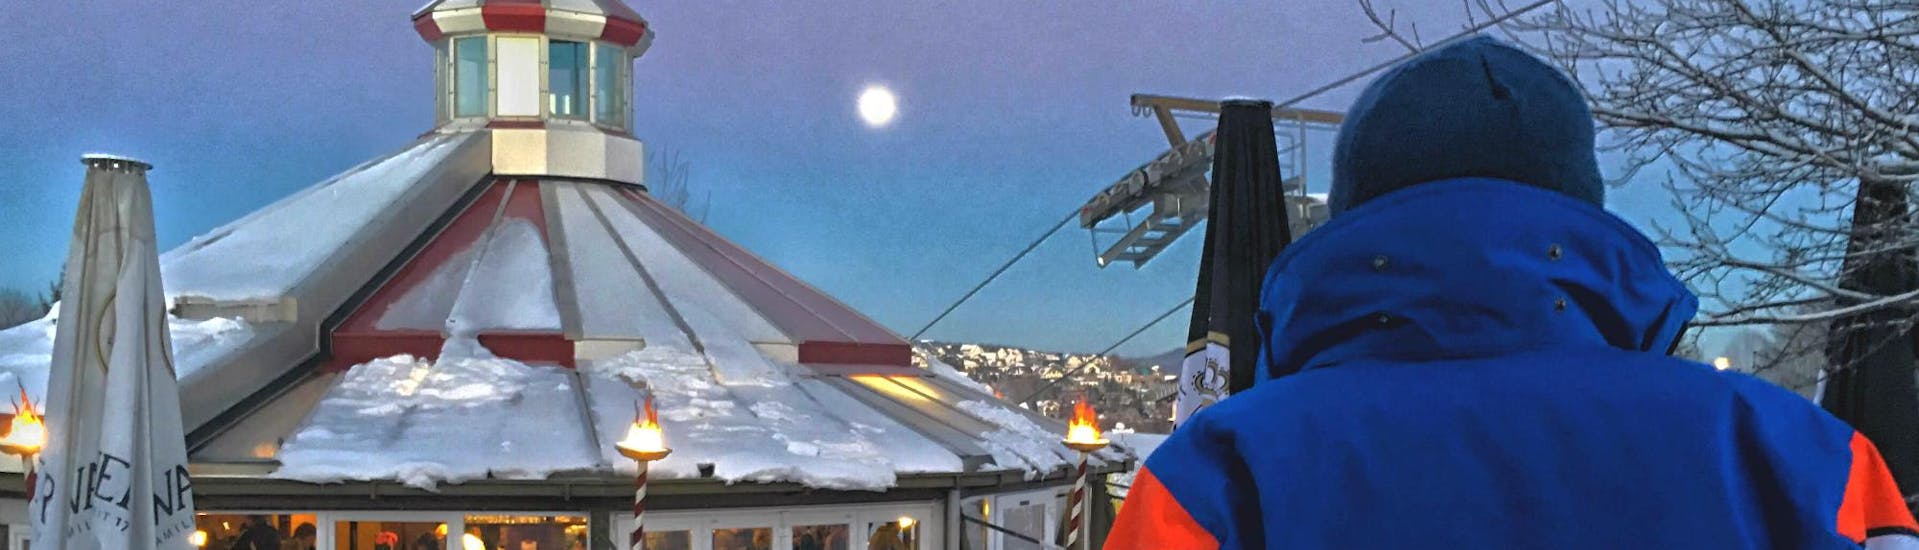 A ski instructor of the ski school Neue Skischule Winterberg is enjoying the view of the moon during the Night Ski Lessons for Kids & Adults - Beginners in Winterberg.